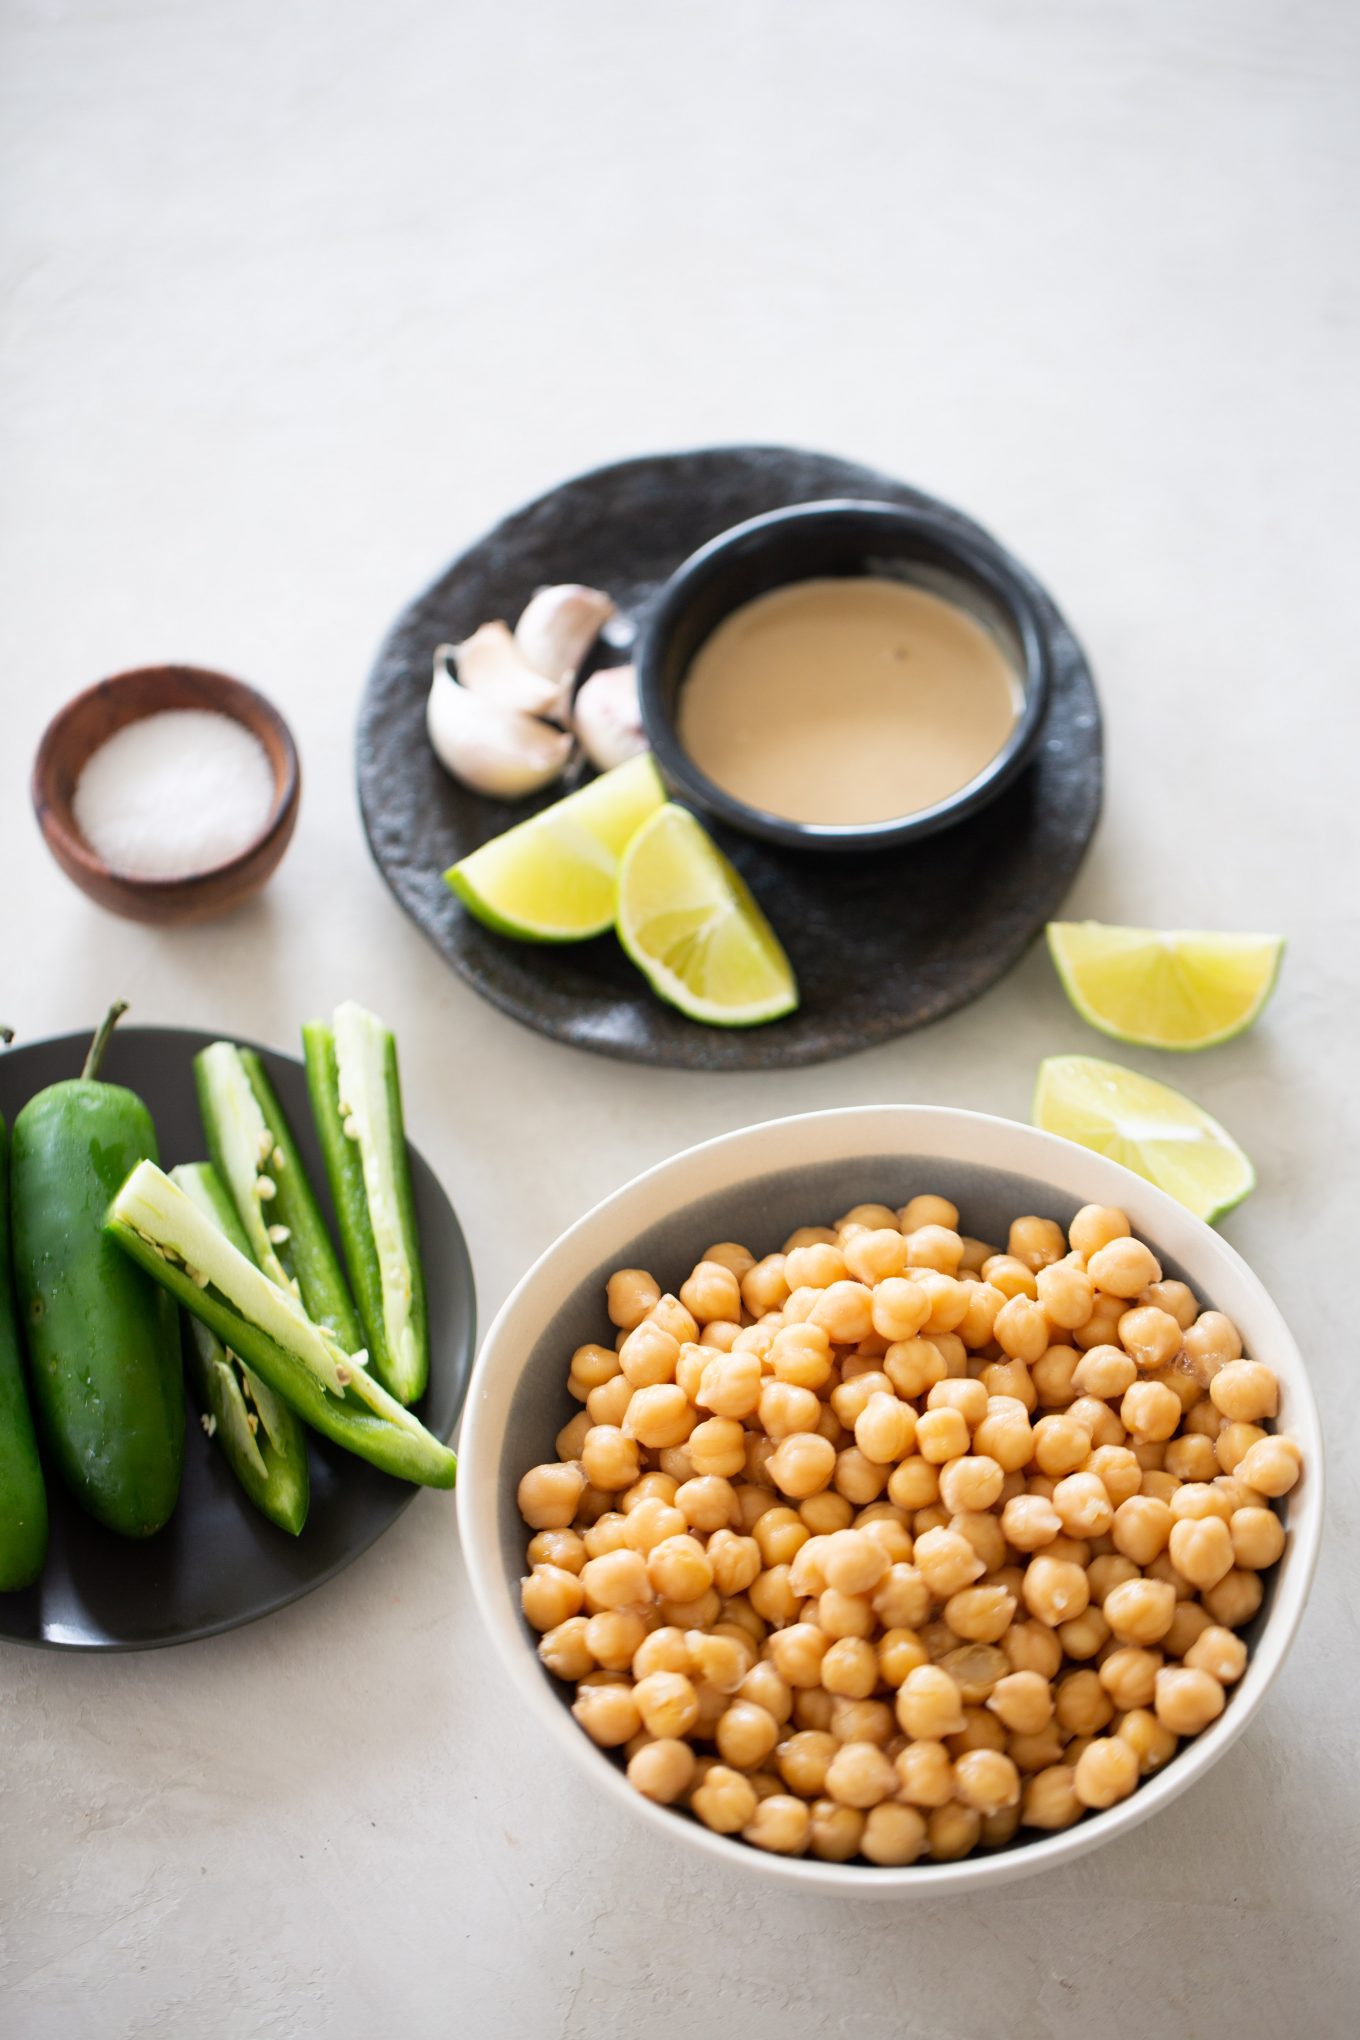 Ingredientes to make a spicy hummus with jalapenos. Chickpeas, jalapeno slices, limes, tahini and garlic.